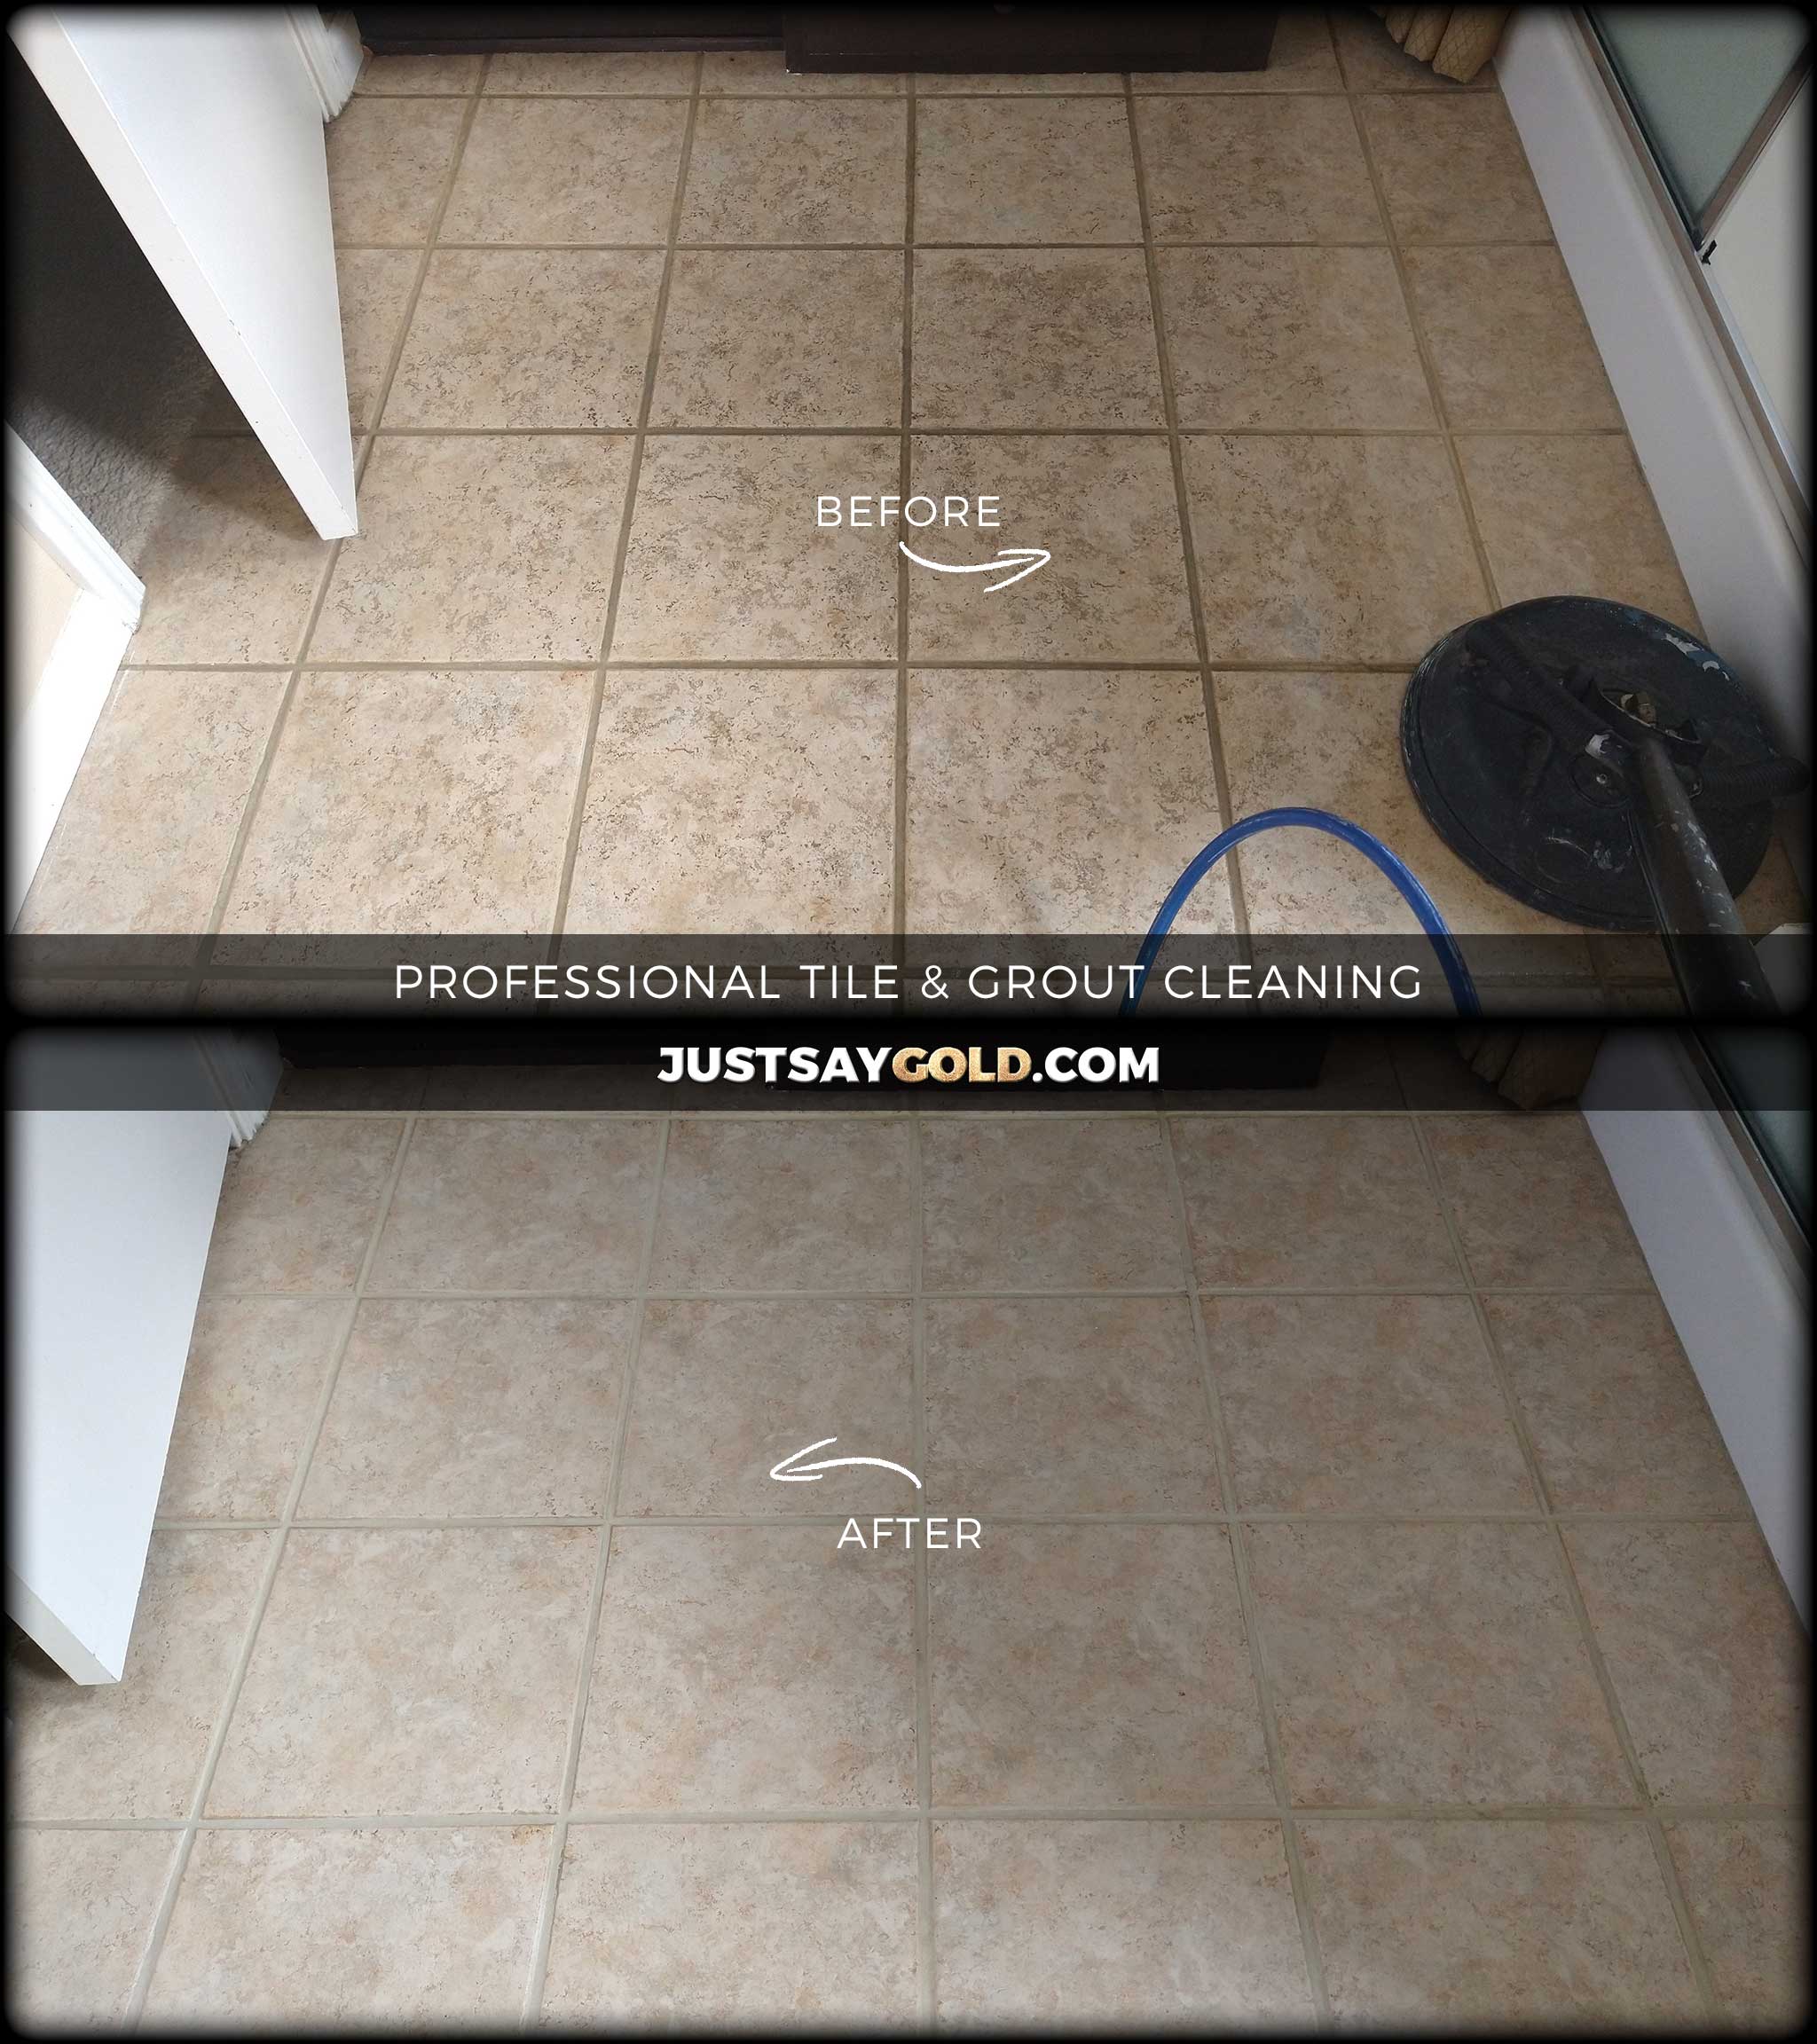 does professional tile and grout cleaning work